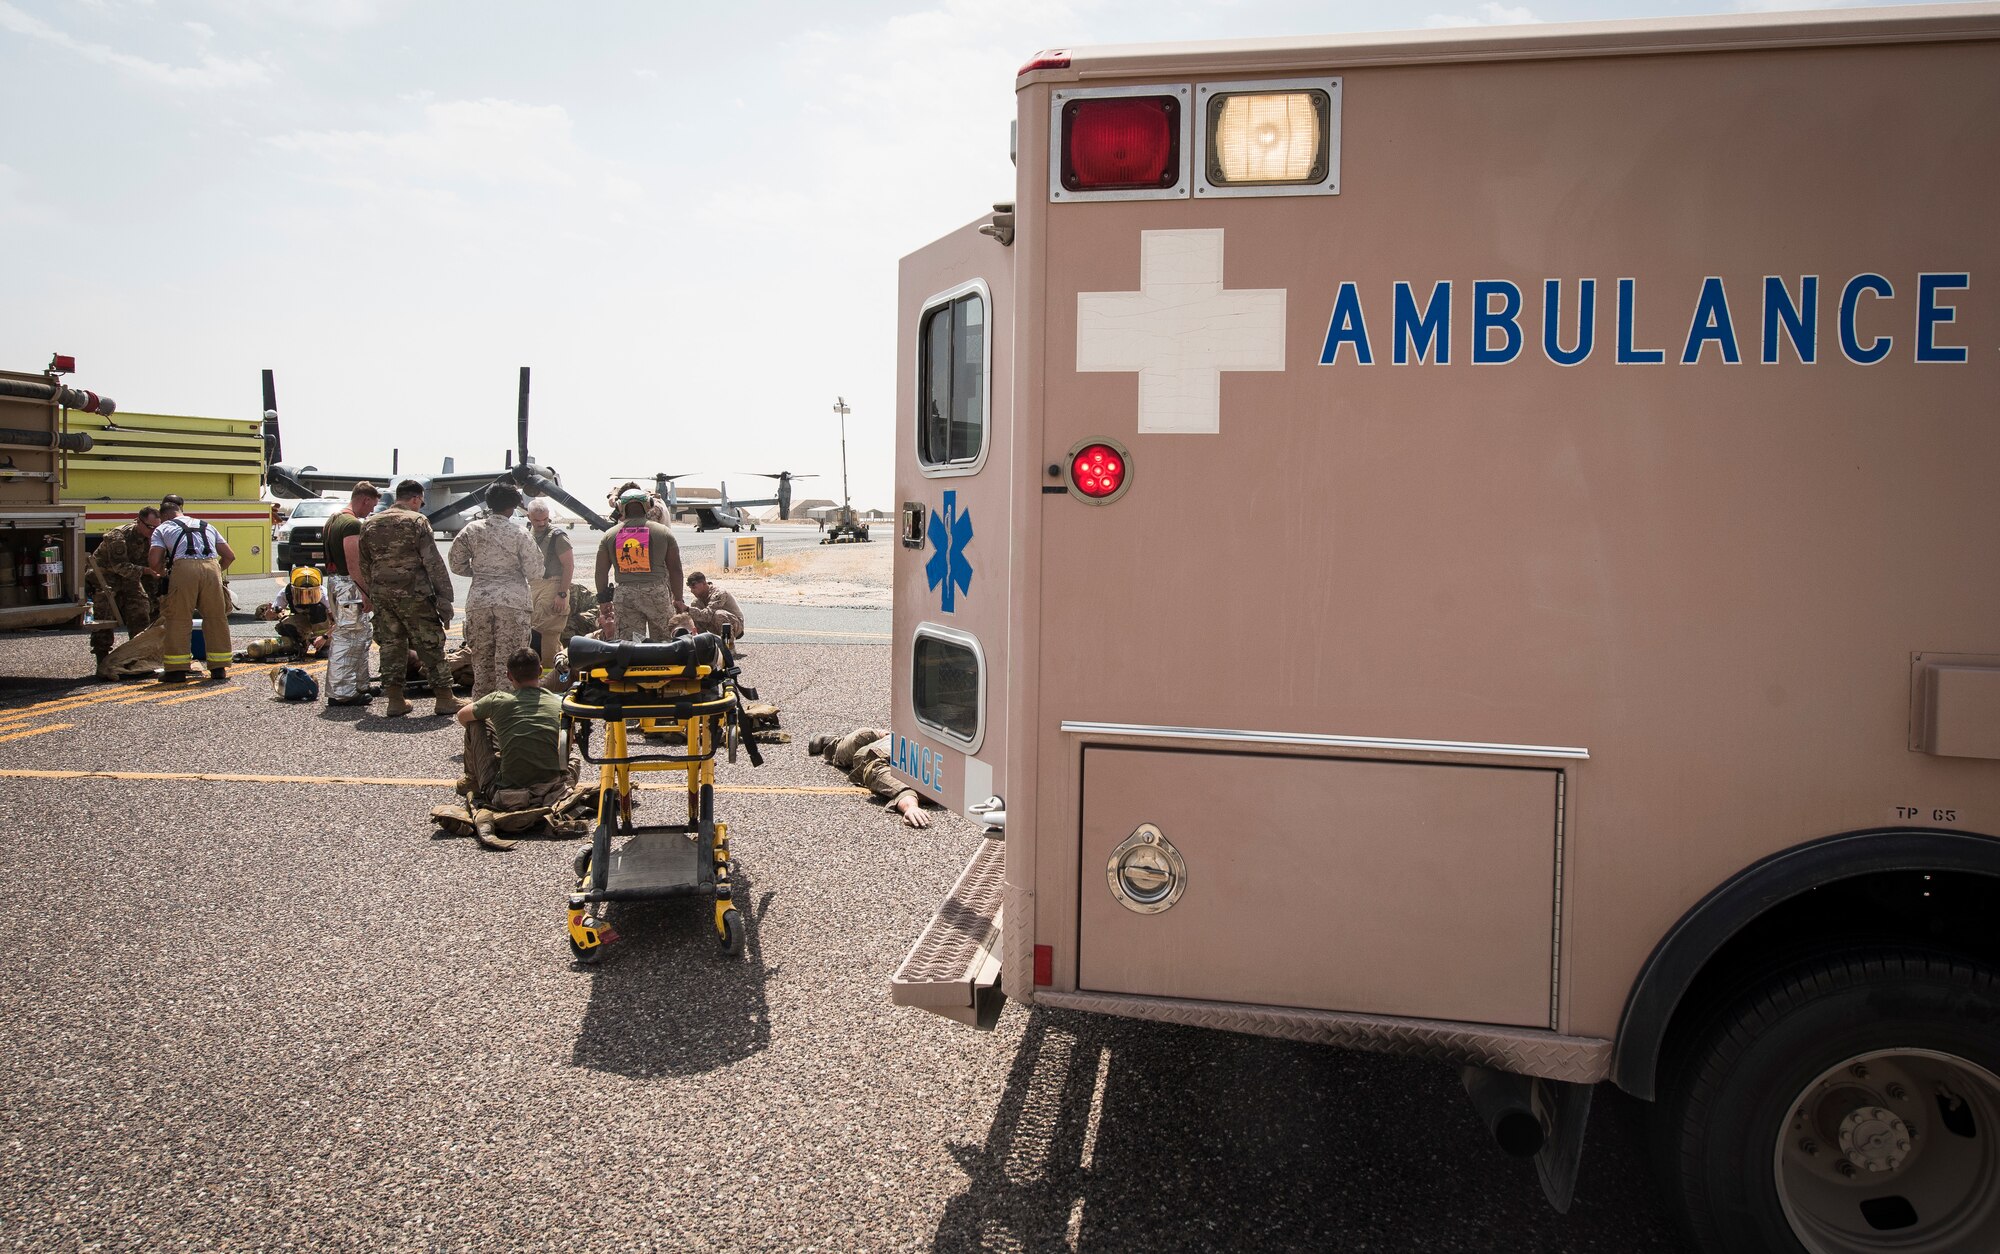 U.S. military service members participate in an airfield exercise at Ahmed al-Jaber Air Base, Kuwait, Aug. 16, 2019. The exercise was an opportunity for service members from multiple branches to cooperate on one of the most intense scenarios a firefighter could be called for: an aircraft on fire on the flightline. (U.S. Air Force photo by Senior Airman Lane T. Plummer)